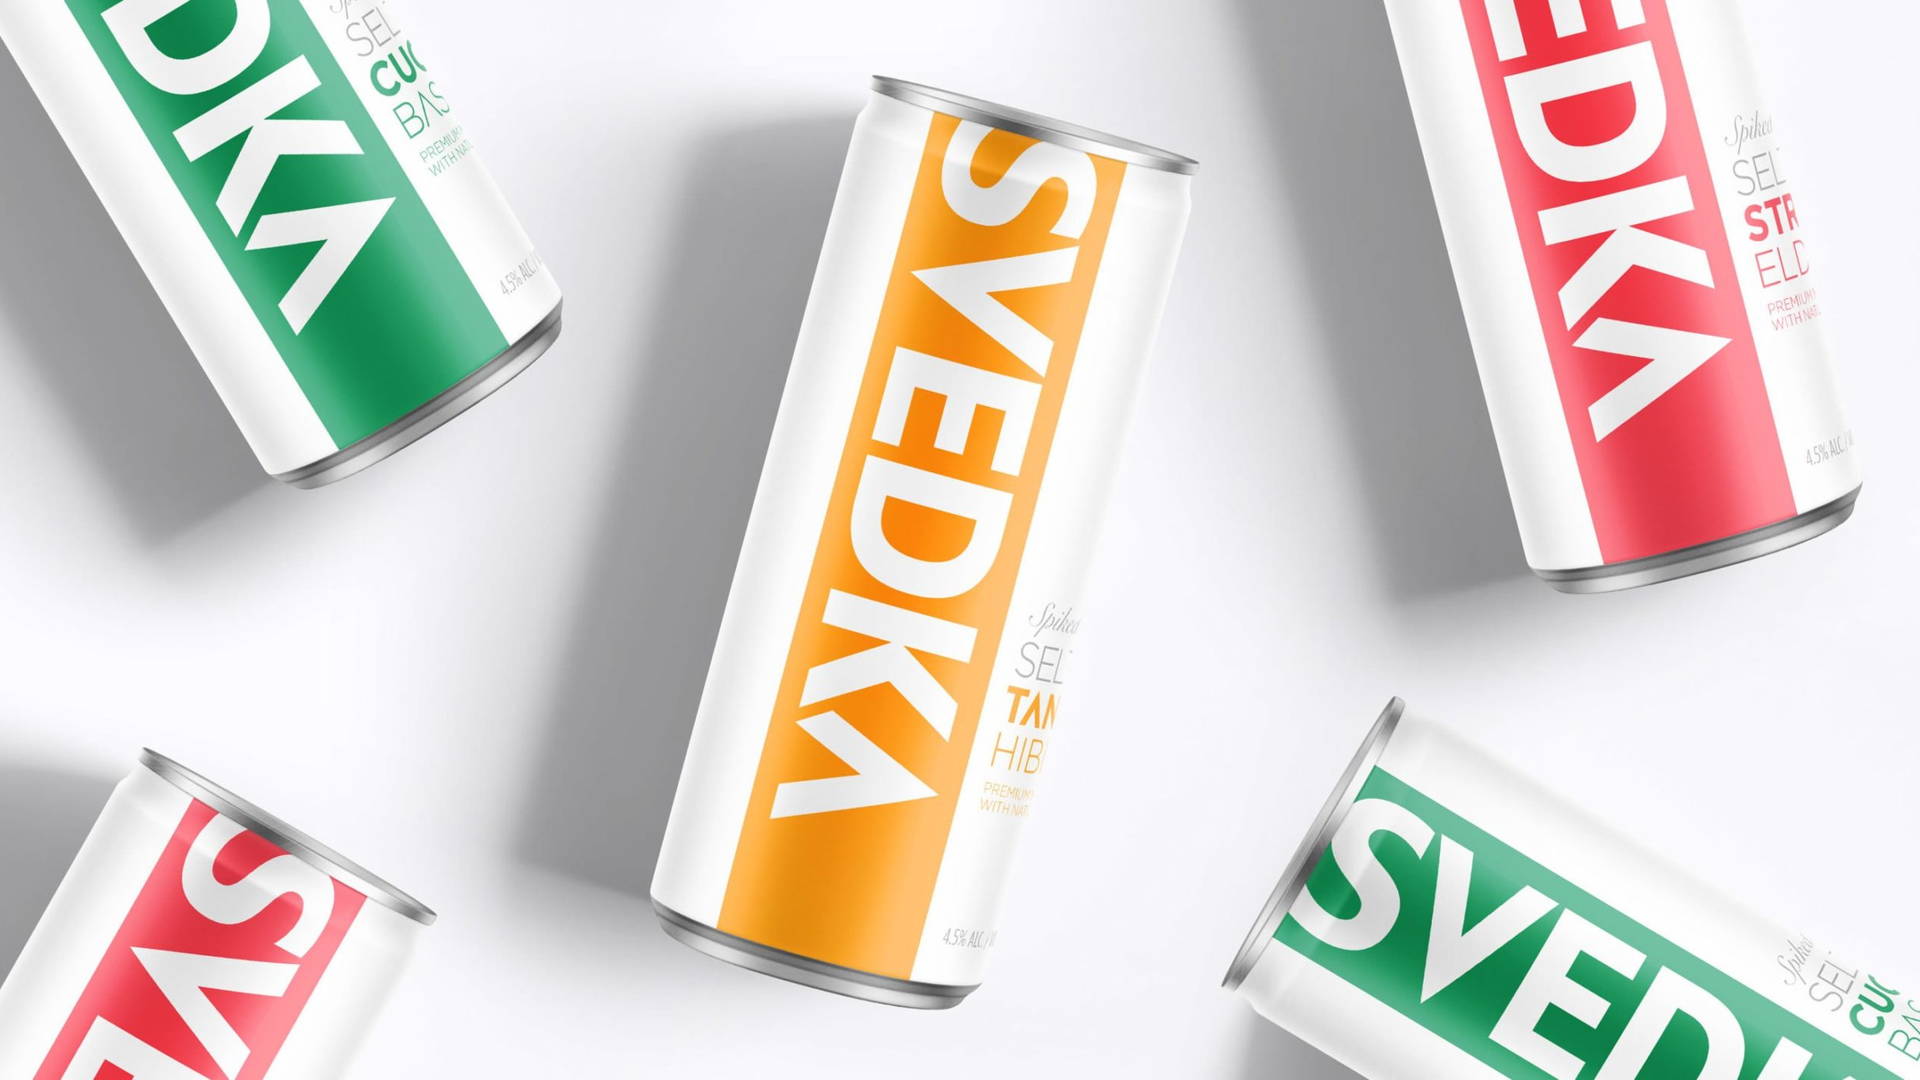 Featured image for This Svedka Seltzer Makes a Splash in The Canned Cocktail Market With a Pop of Color